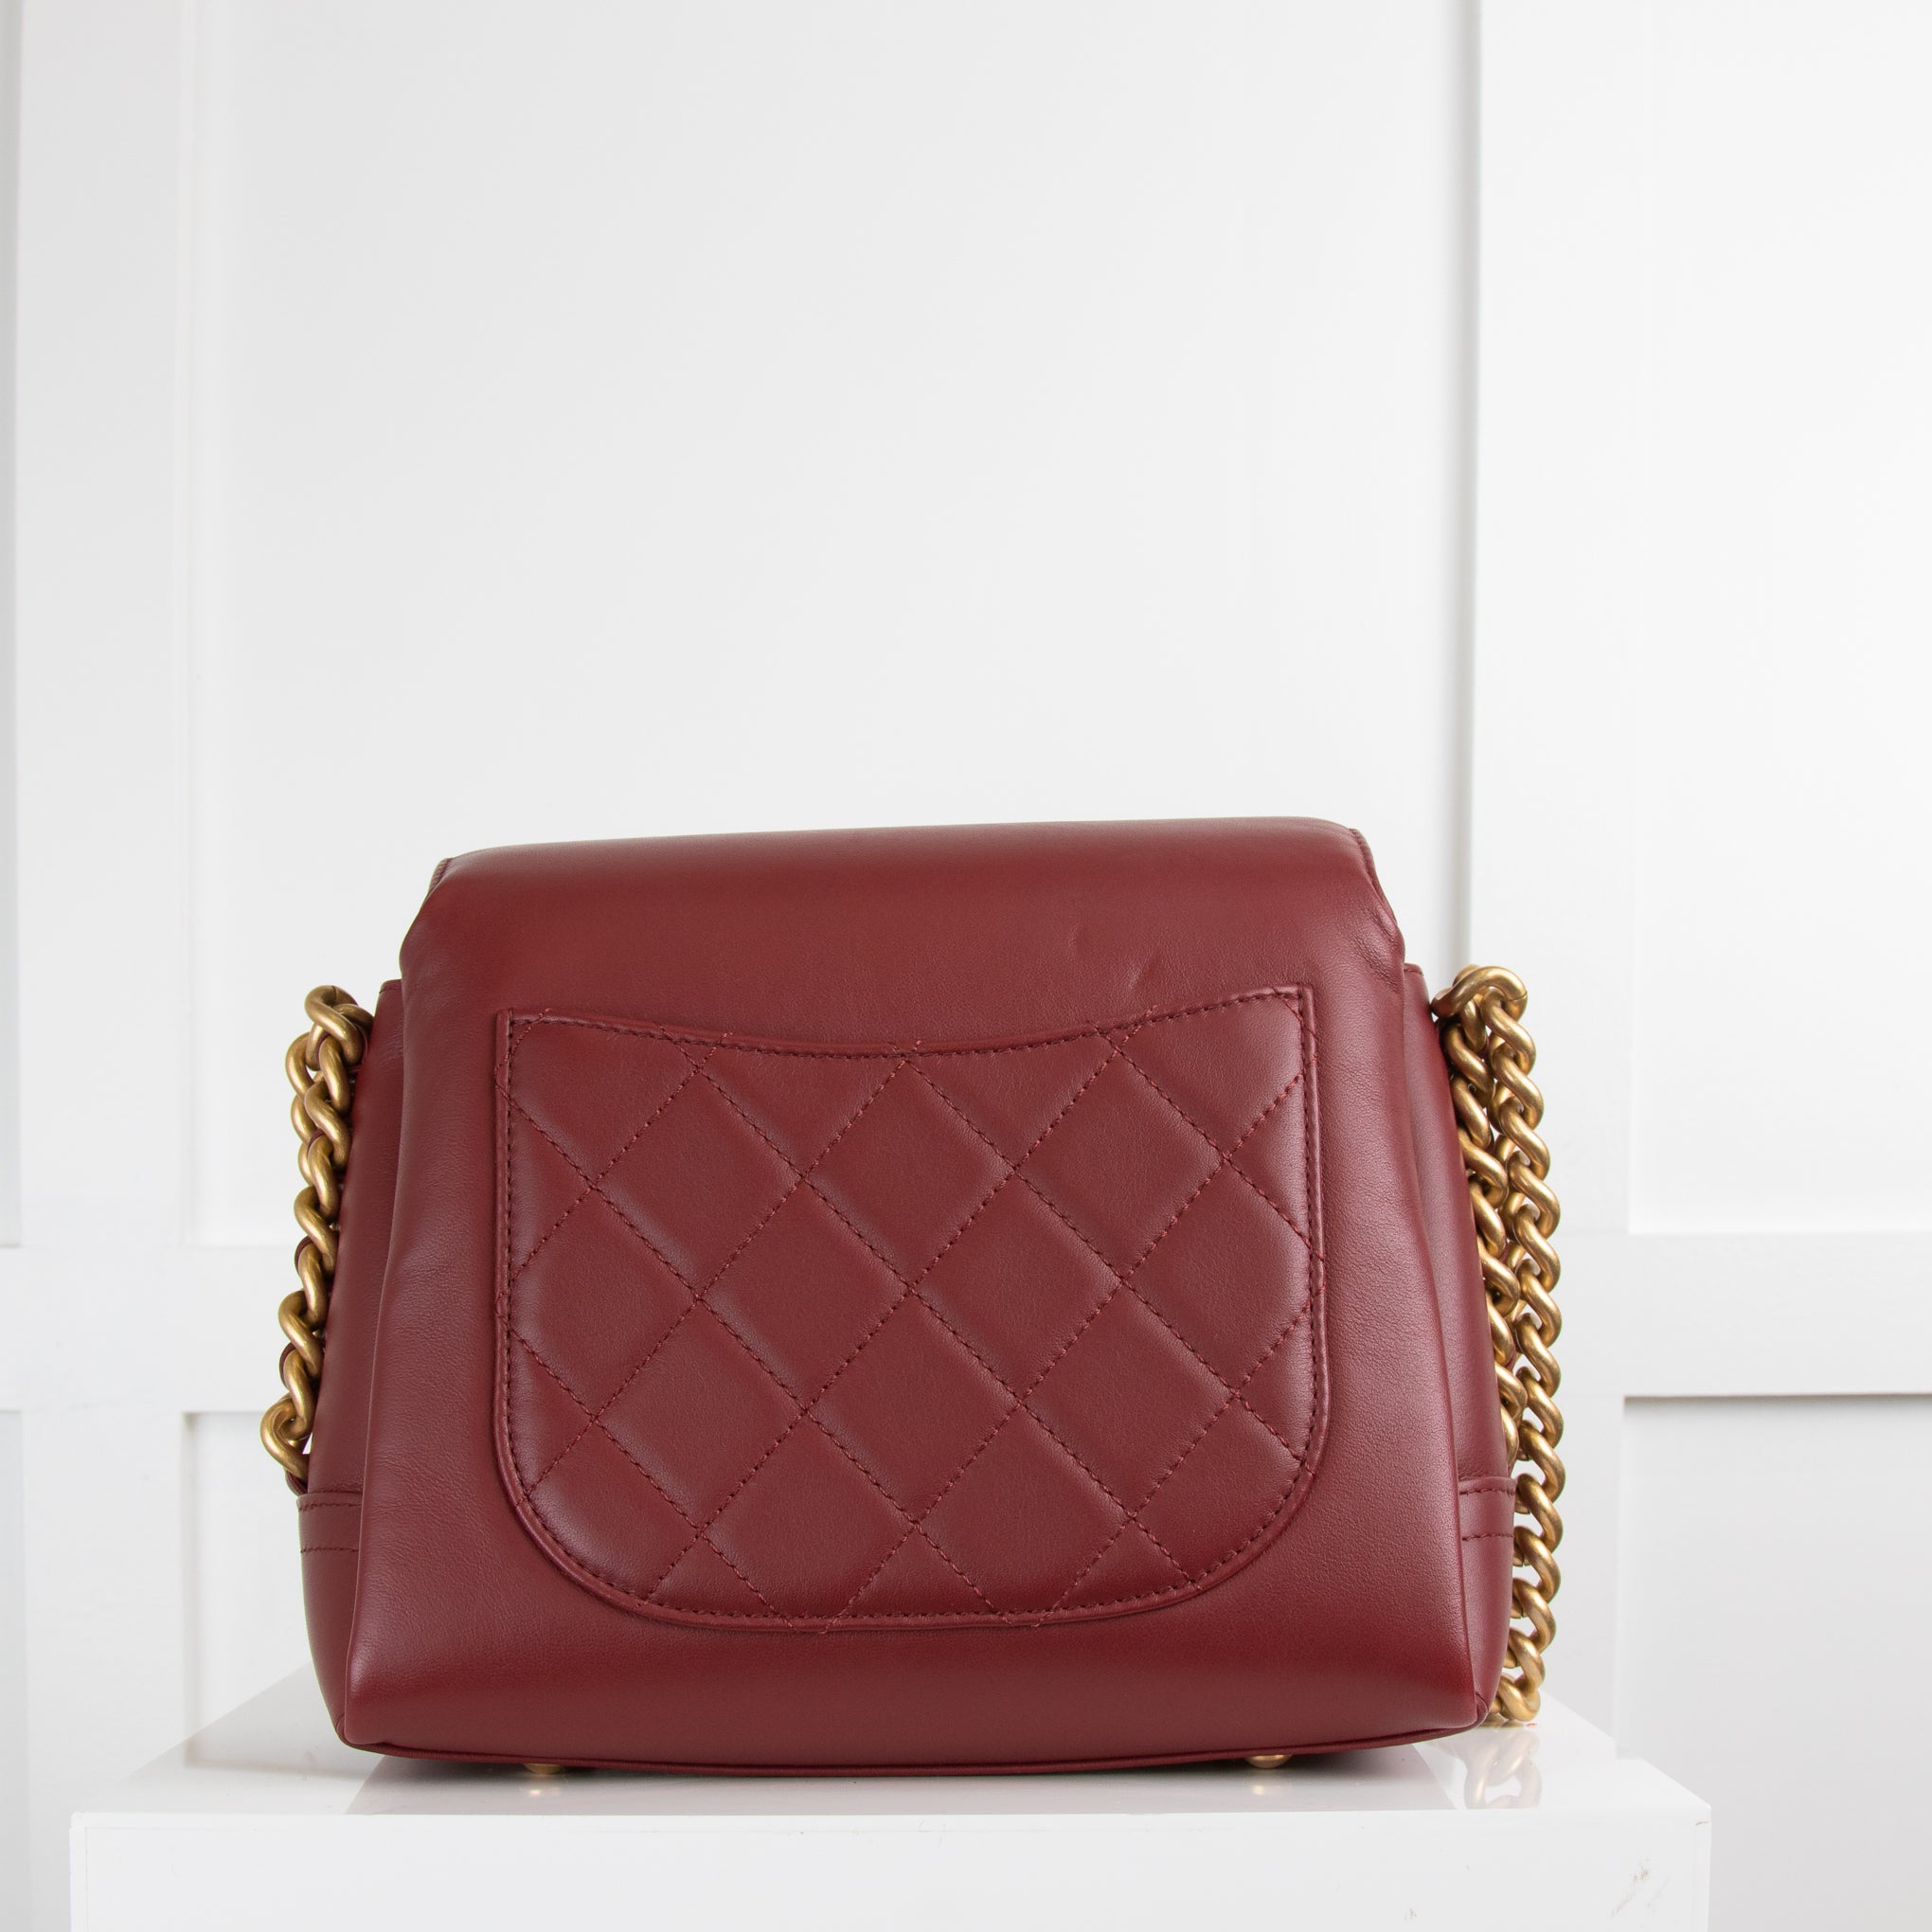 SOLD online - New in! Chanel 2019 burgundy red flap bag with top